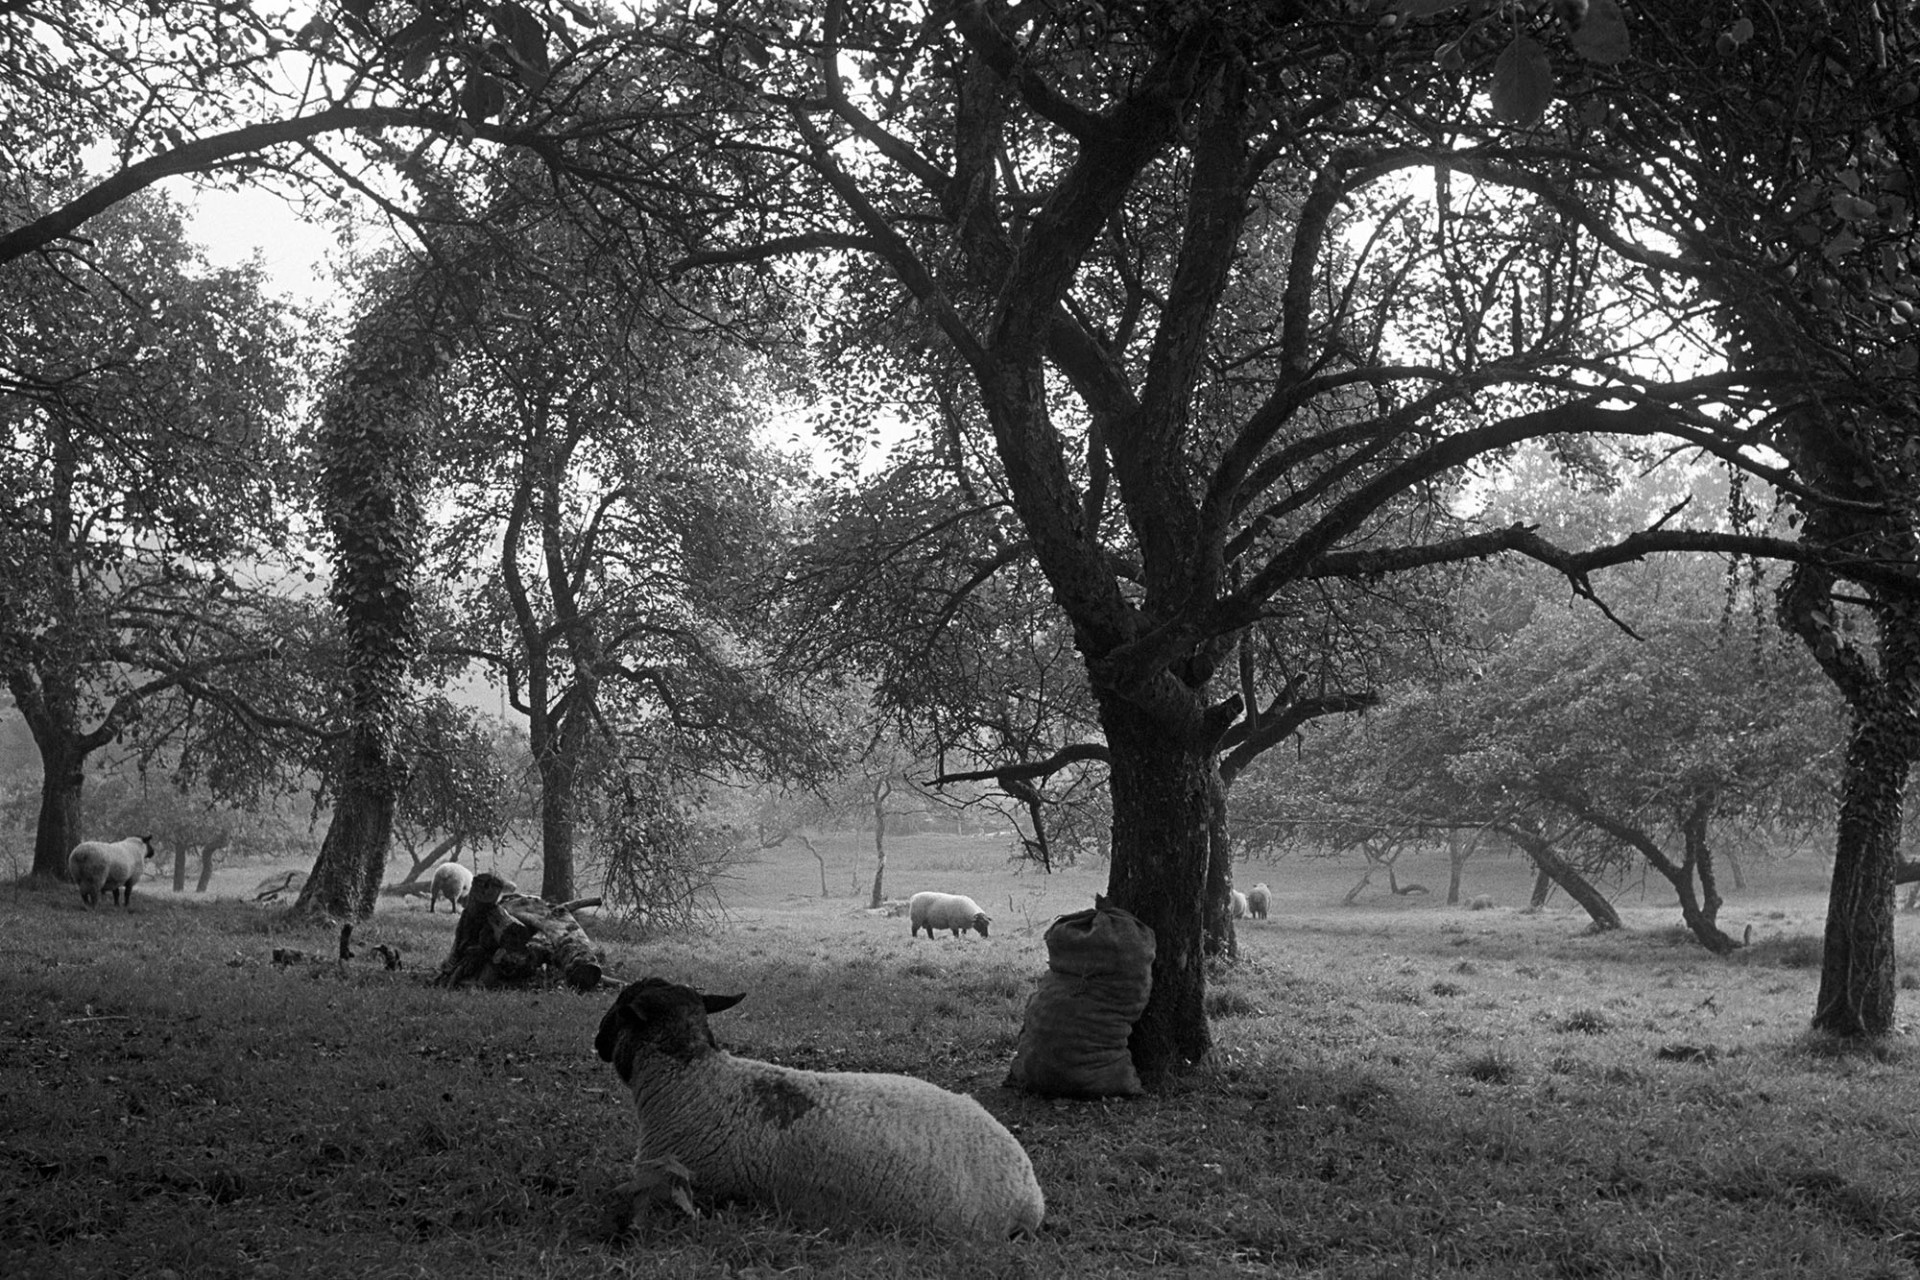 Rams sitting in cider orchard sack of apples against tree. 
[Rams sitting and grazing in a cider orchard at Westpark, Iddesleigh. A sack of apples is propped against one of the tree trunks.]